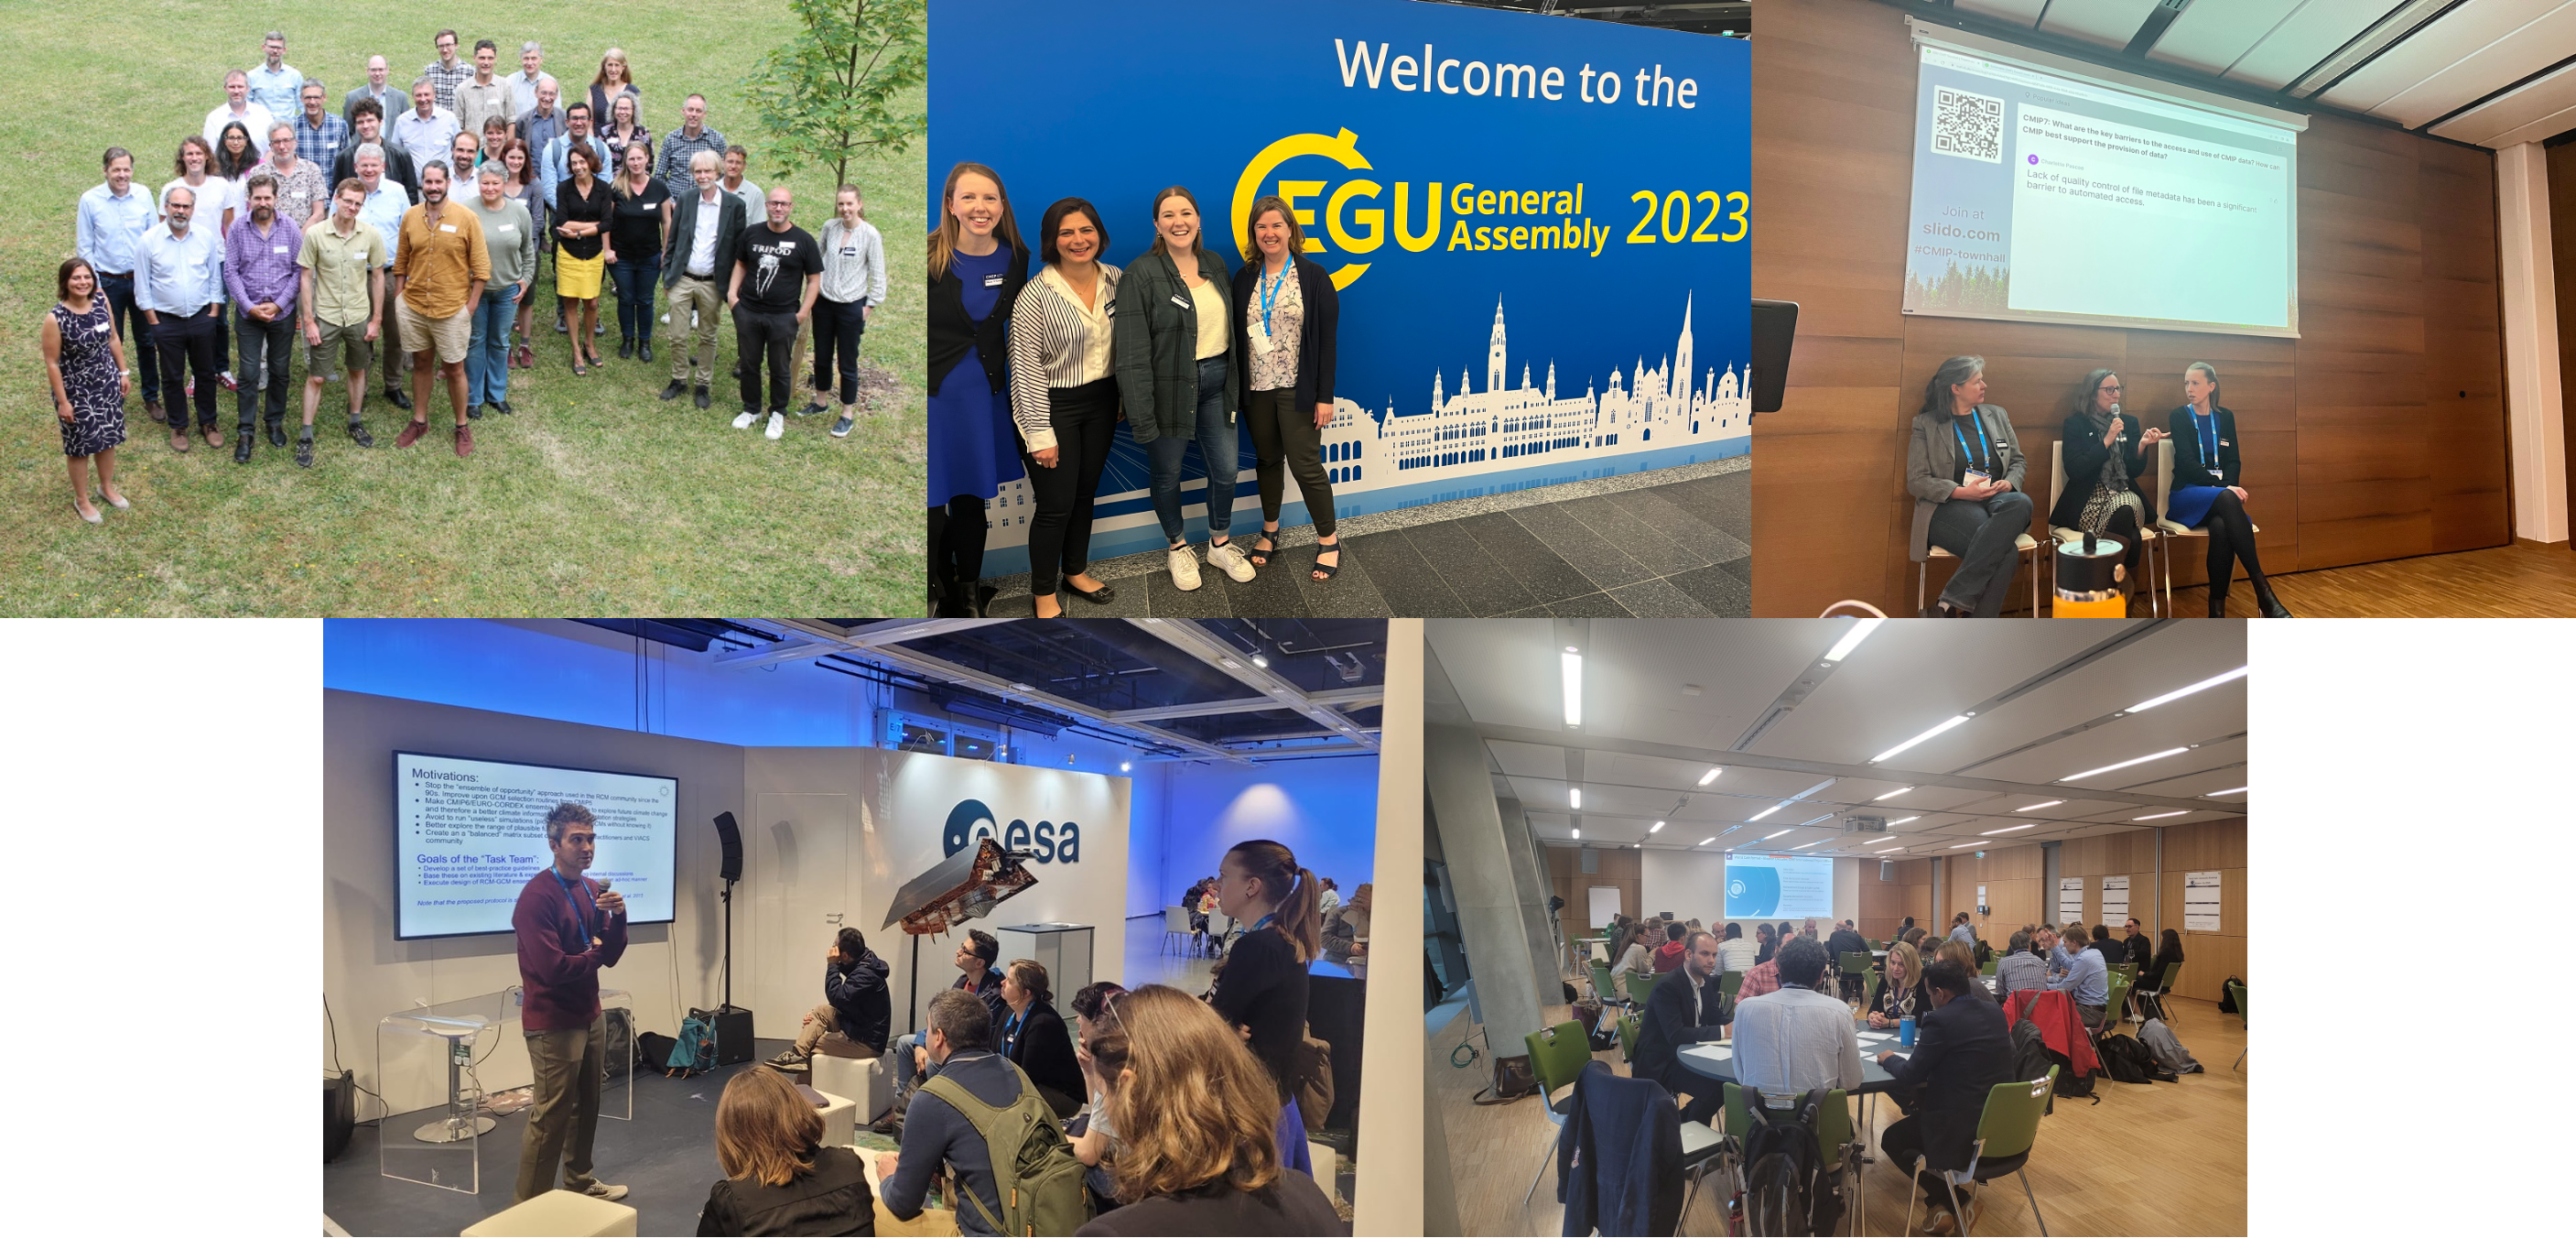 Montage of five photos from CMIP-related events across 2022-2023. Photo 1: Group photo of the participants at the ScenarioMIP workshop in Reading in June 2023. Photo 2: Three members of the CMIP International Project Office (Eleanor O'Rourke, Briony Turner, and Beth Dingley) alongside CMIP Panel member Julie Arblaster at EGU in April 2023. Photo 3: CMIP Panel Co-chair Helene Hewitt, Julie Arblaster and Eleanor O'Rourke speaking on a panel about improving CMIP data access. Photo 4: Stefan Sobolowski giving a presentation to a group of seated people on CMIP model selection for regional downscaling. Photo 5: Picture of people sat at different tables during the GCOS 2022 World Cafe event.